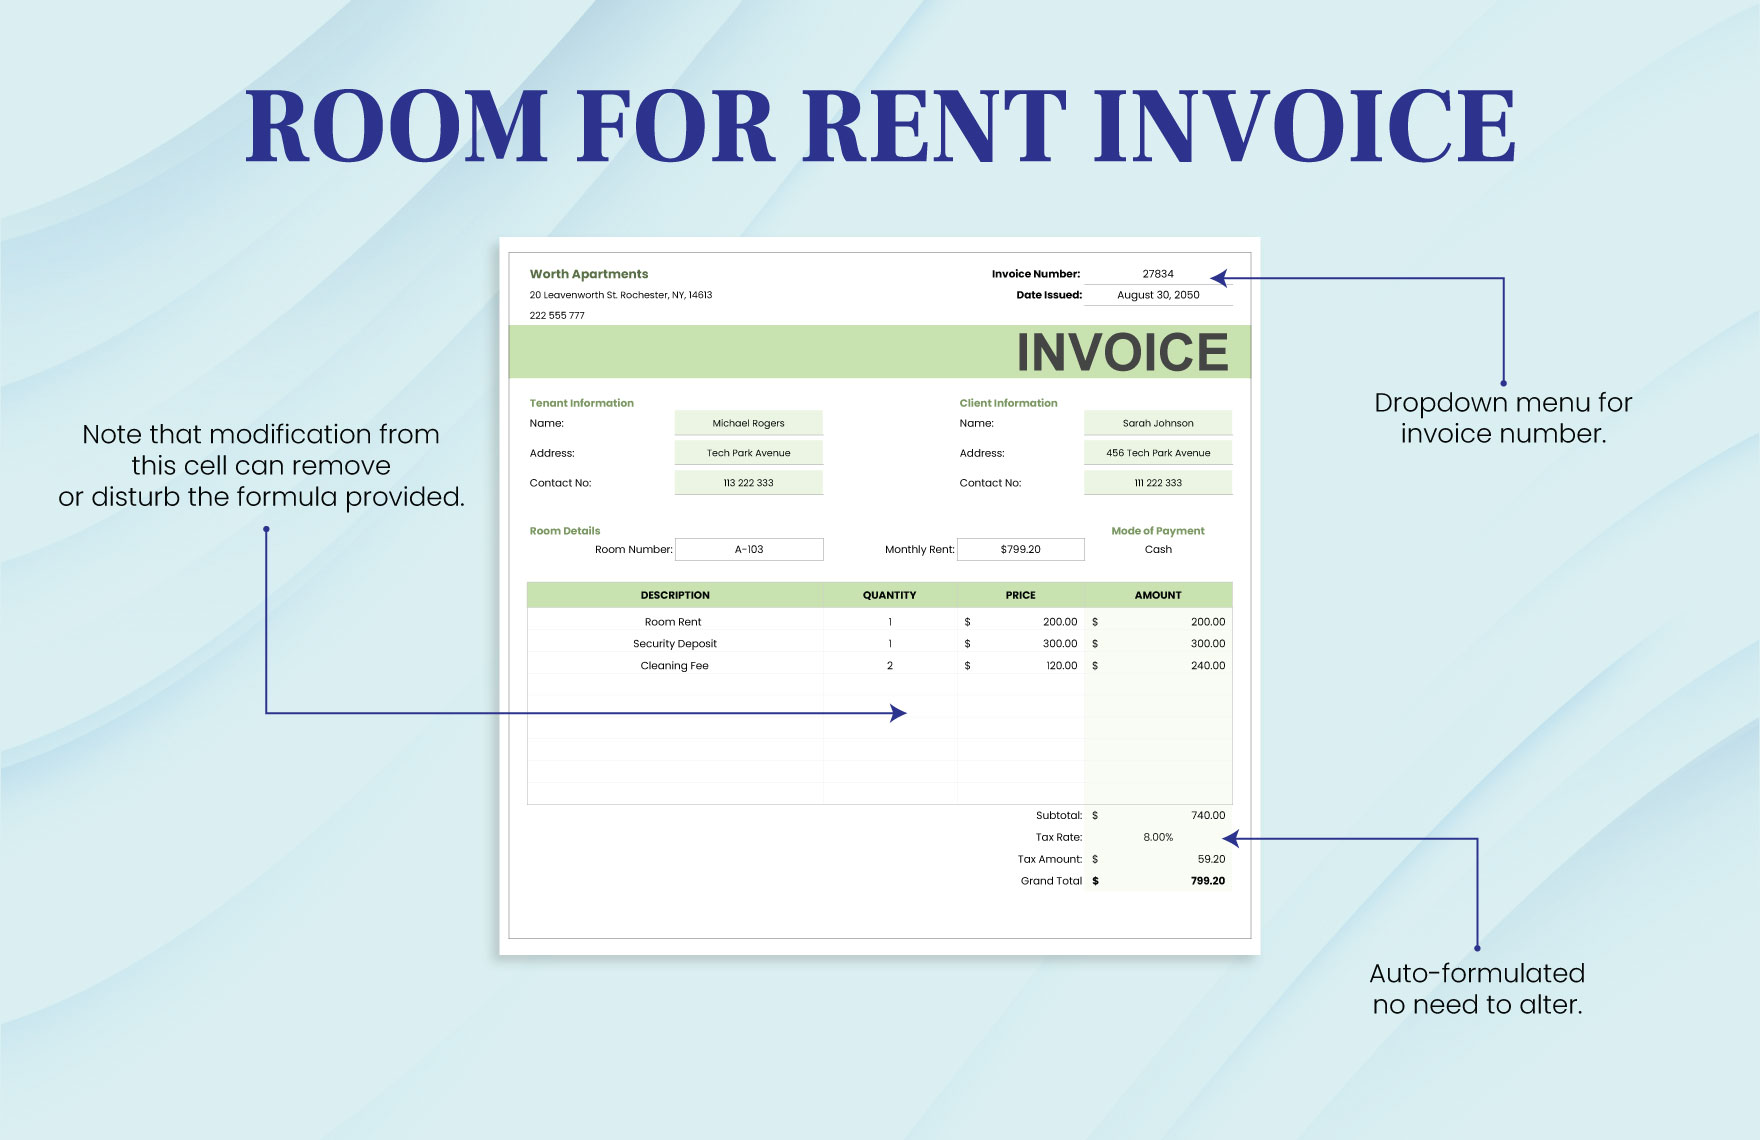 Room for Rent Invoice Template